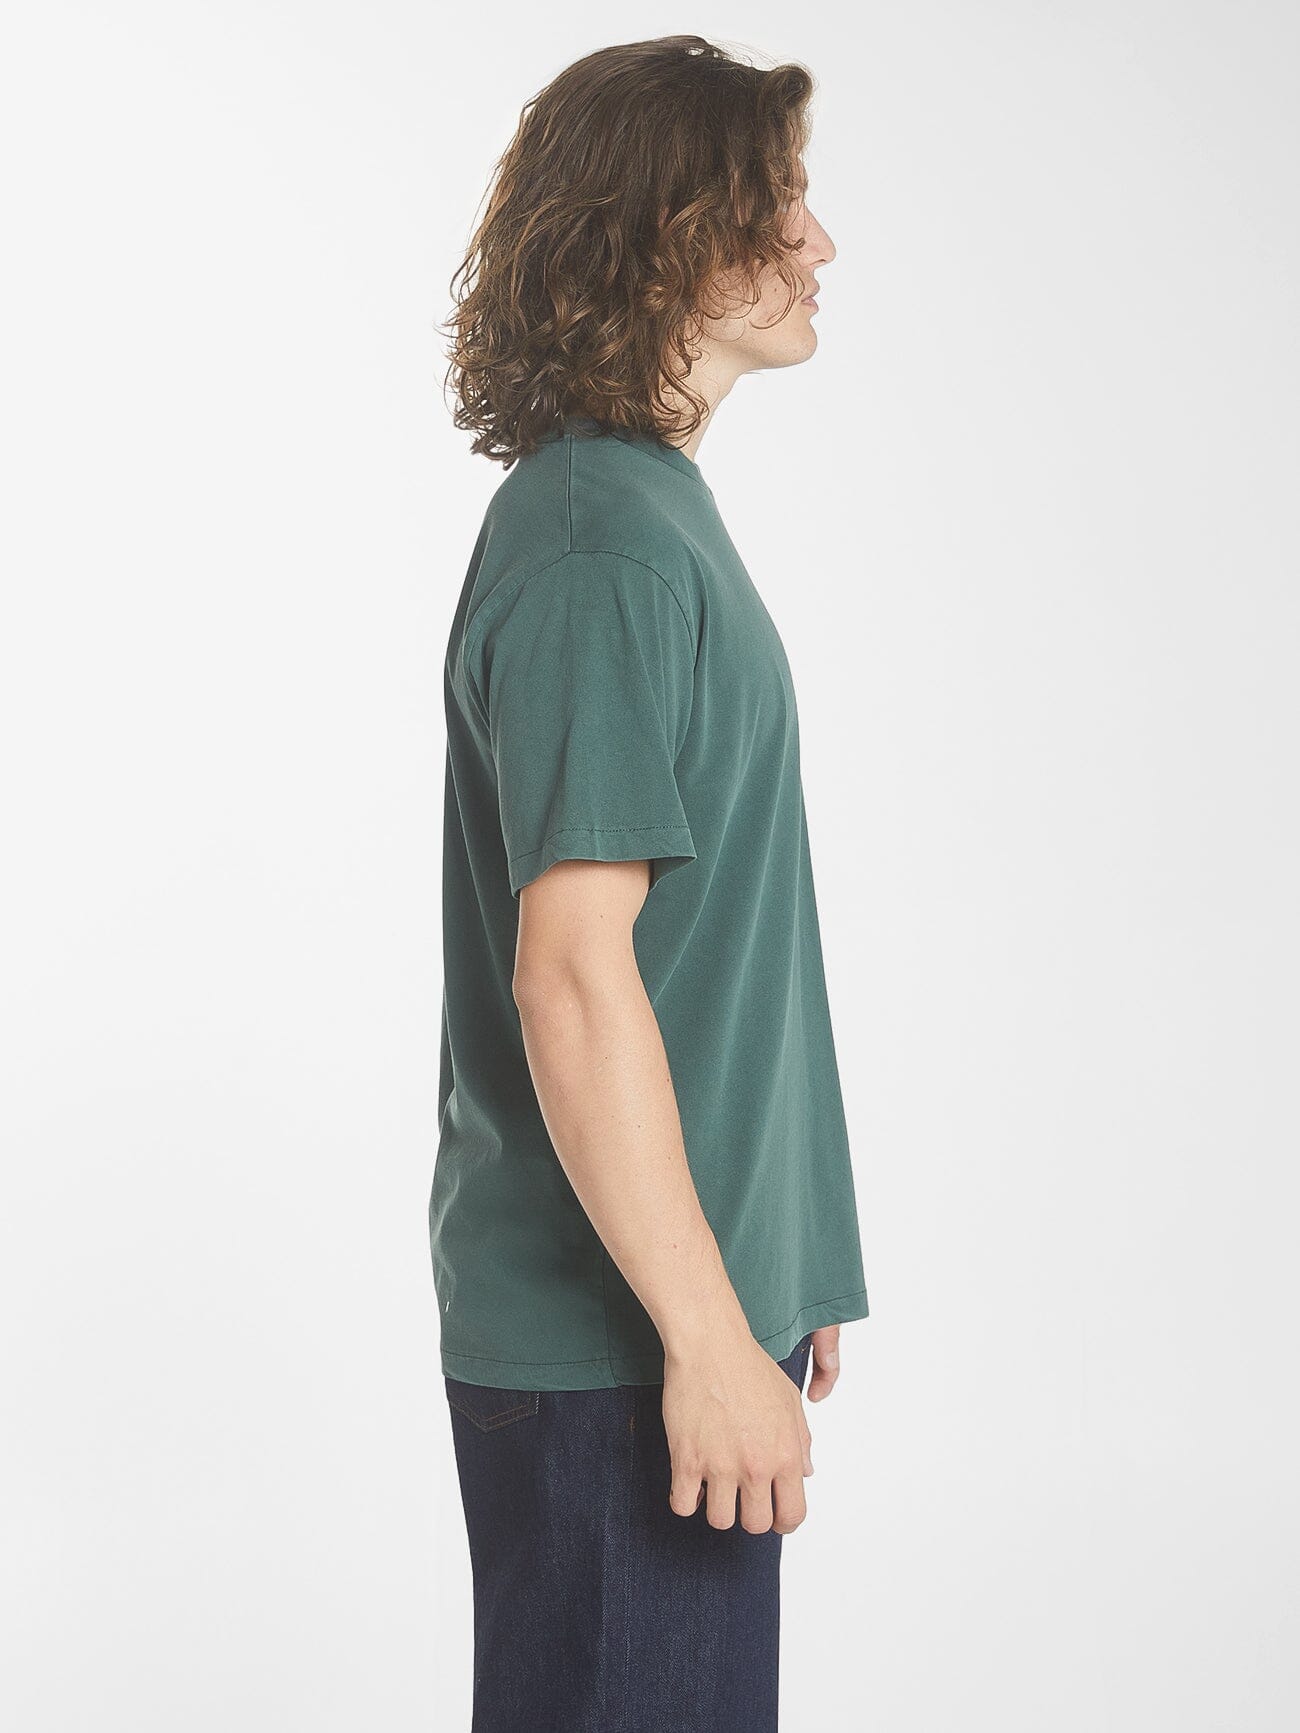 Earth Services Merch Fit Tee - Sycamore XS